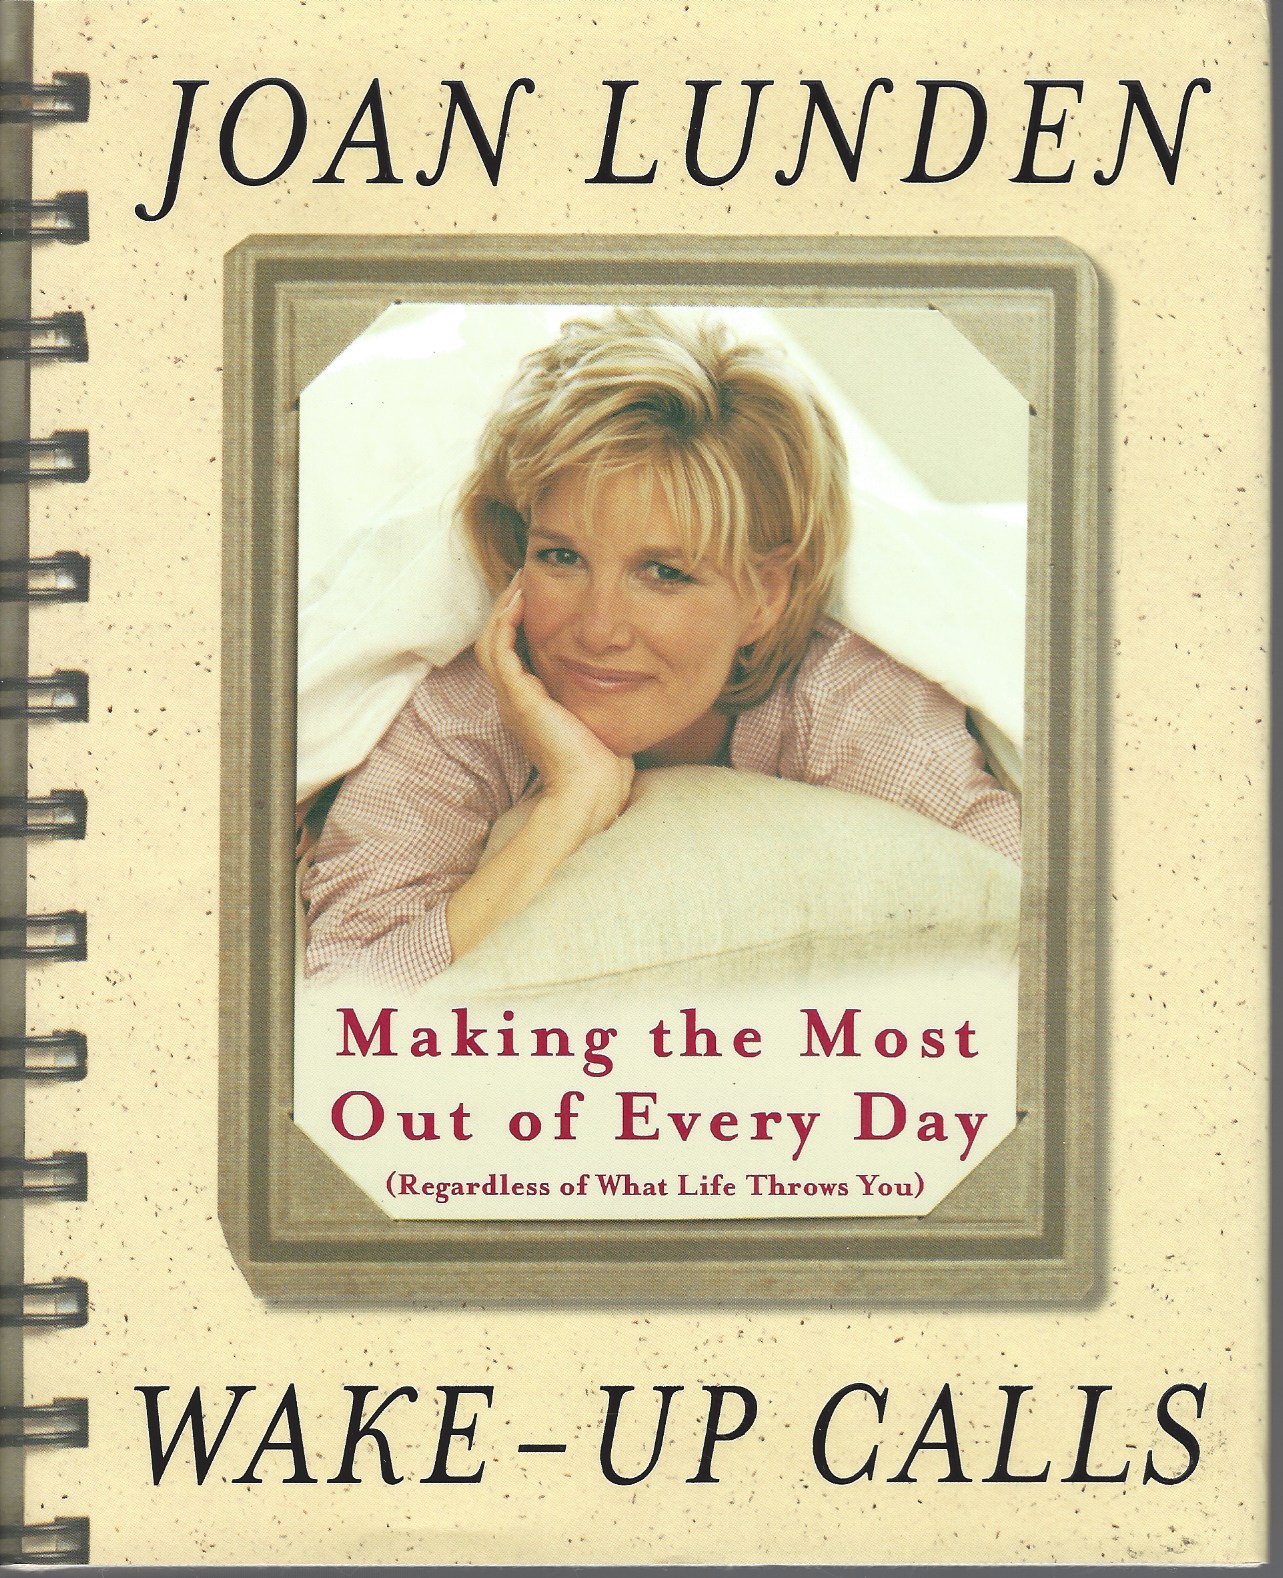 LUNDEN JOAN - Wake-Up Calls: Making the Most out of Every Day